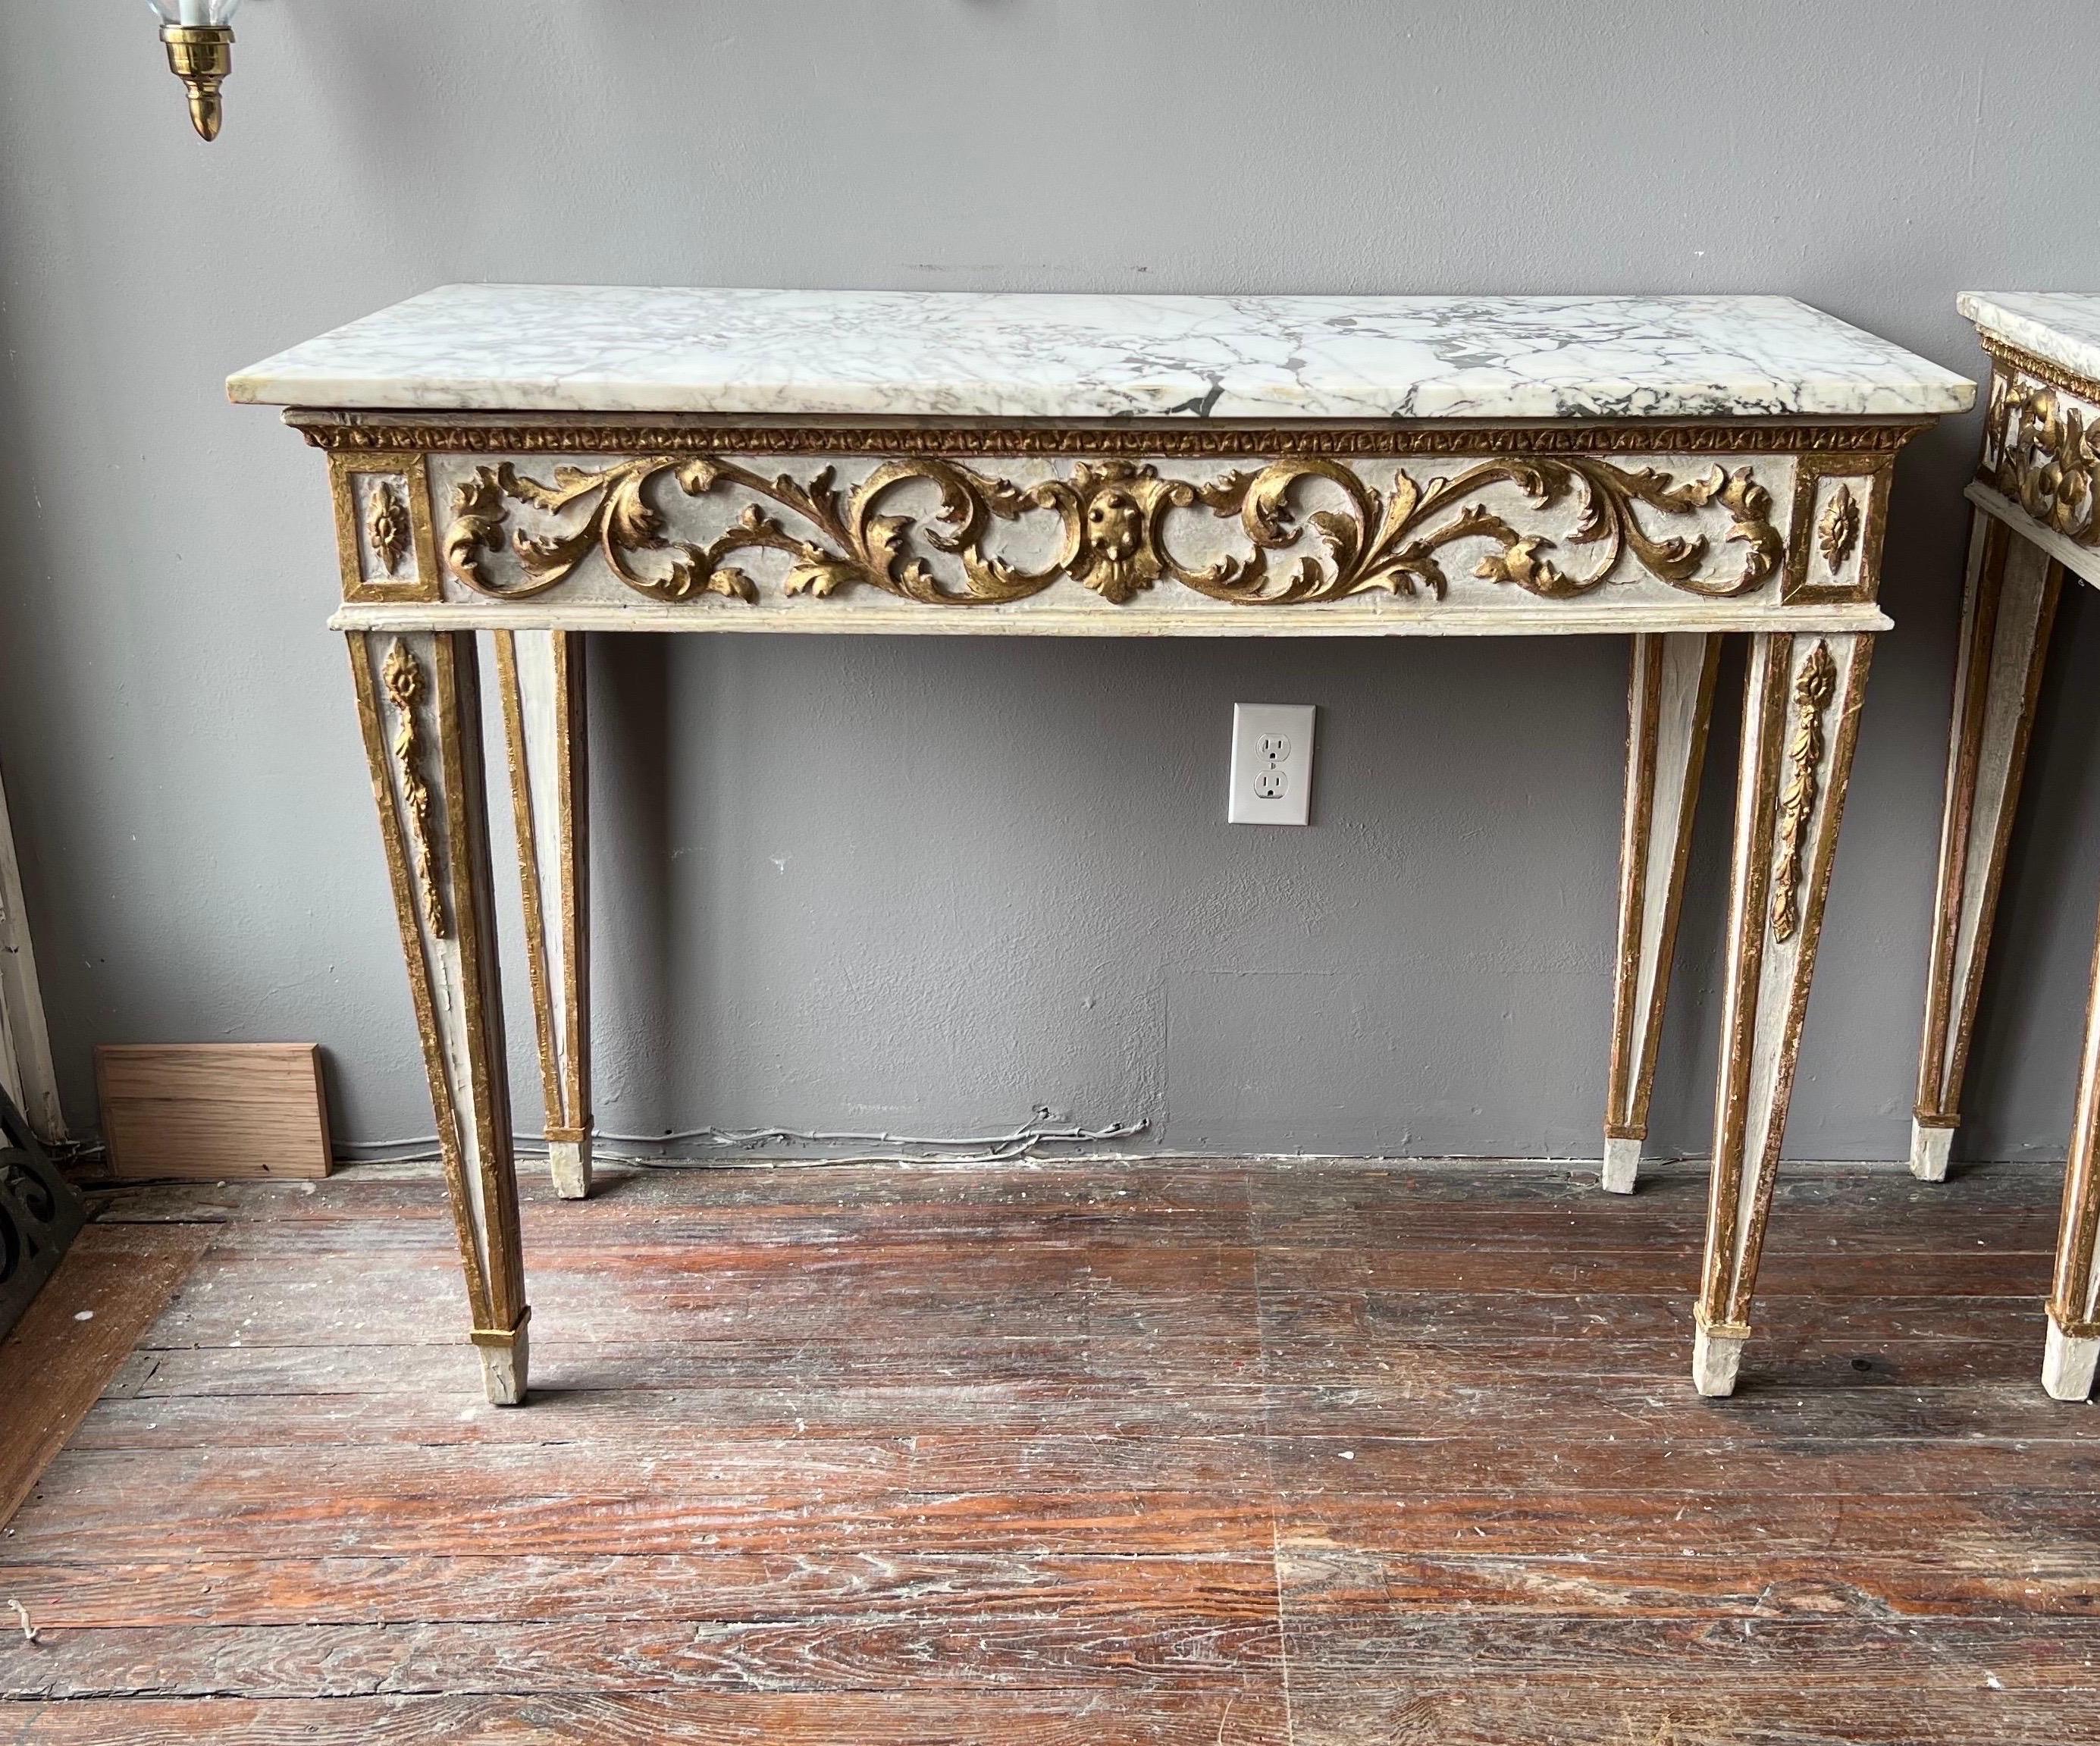 Very fine pair of 18th century French neoclassical gilt wood and paint decorated marble top consoles on tapered legs with bellflower and original chiseled marble.